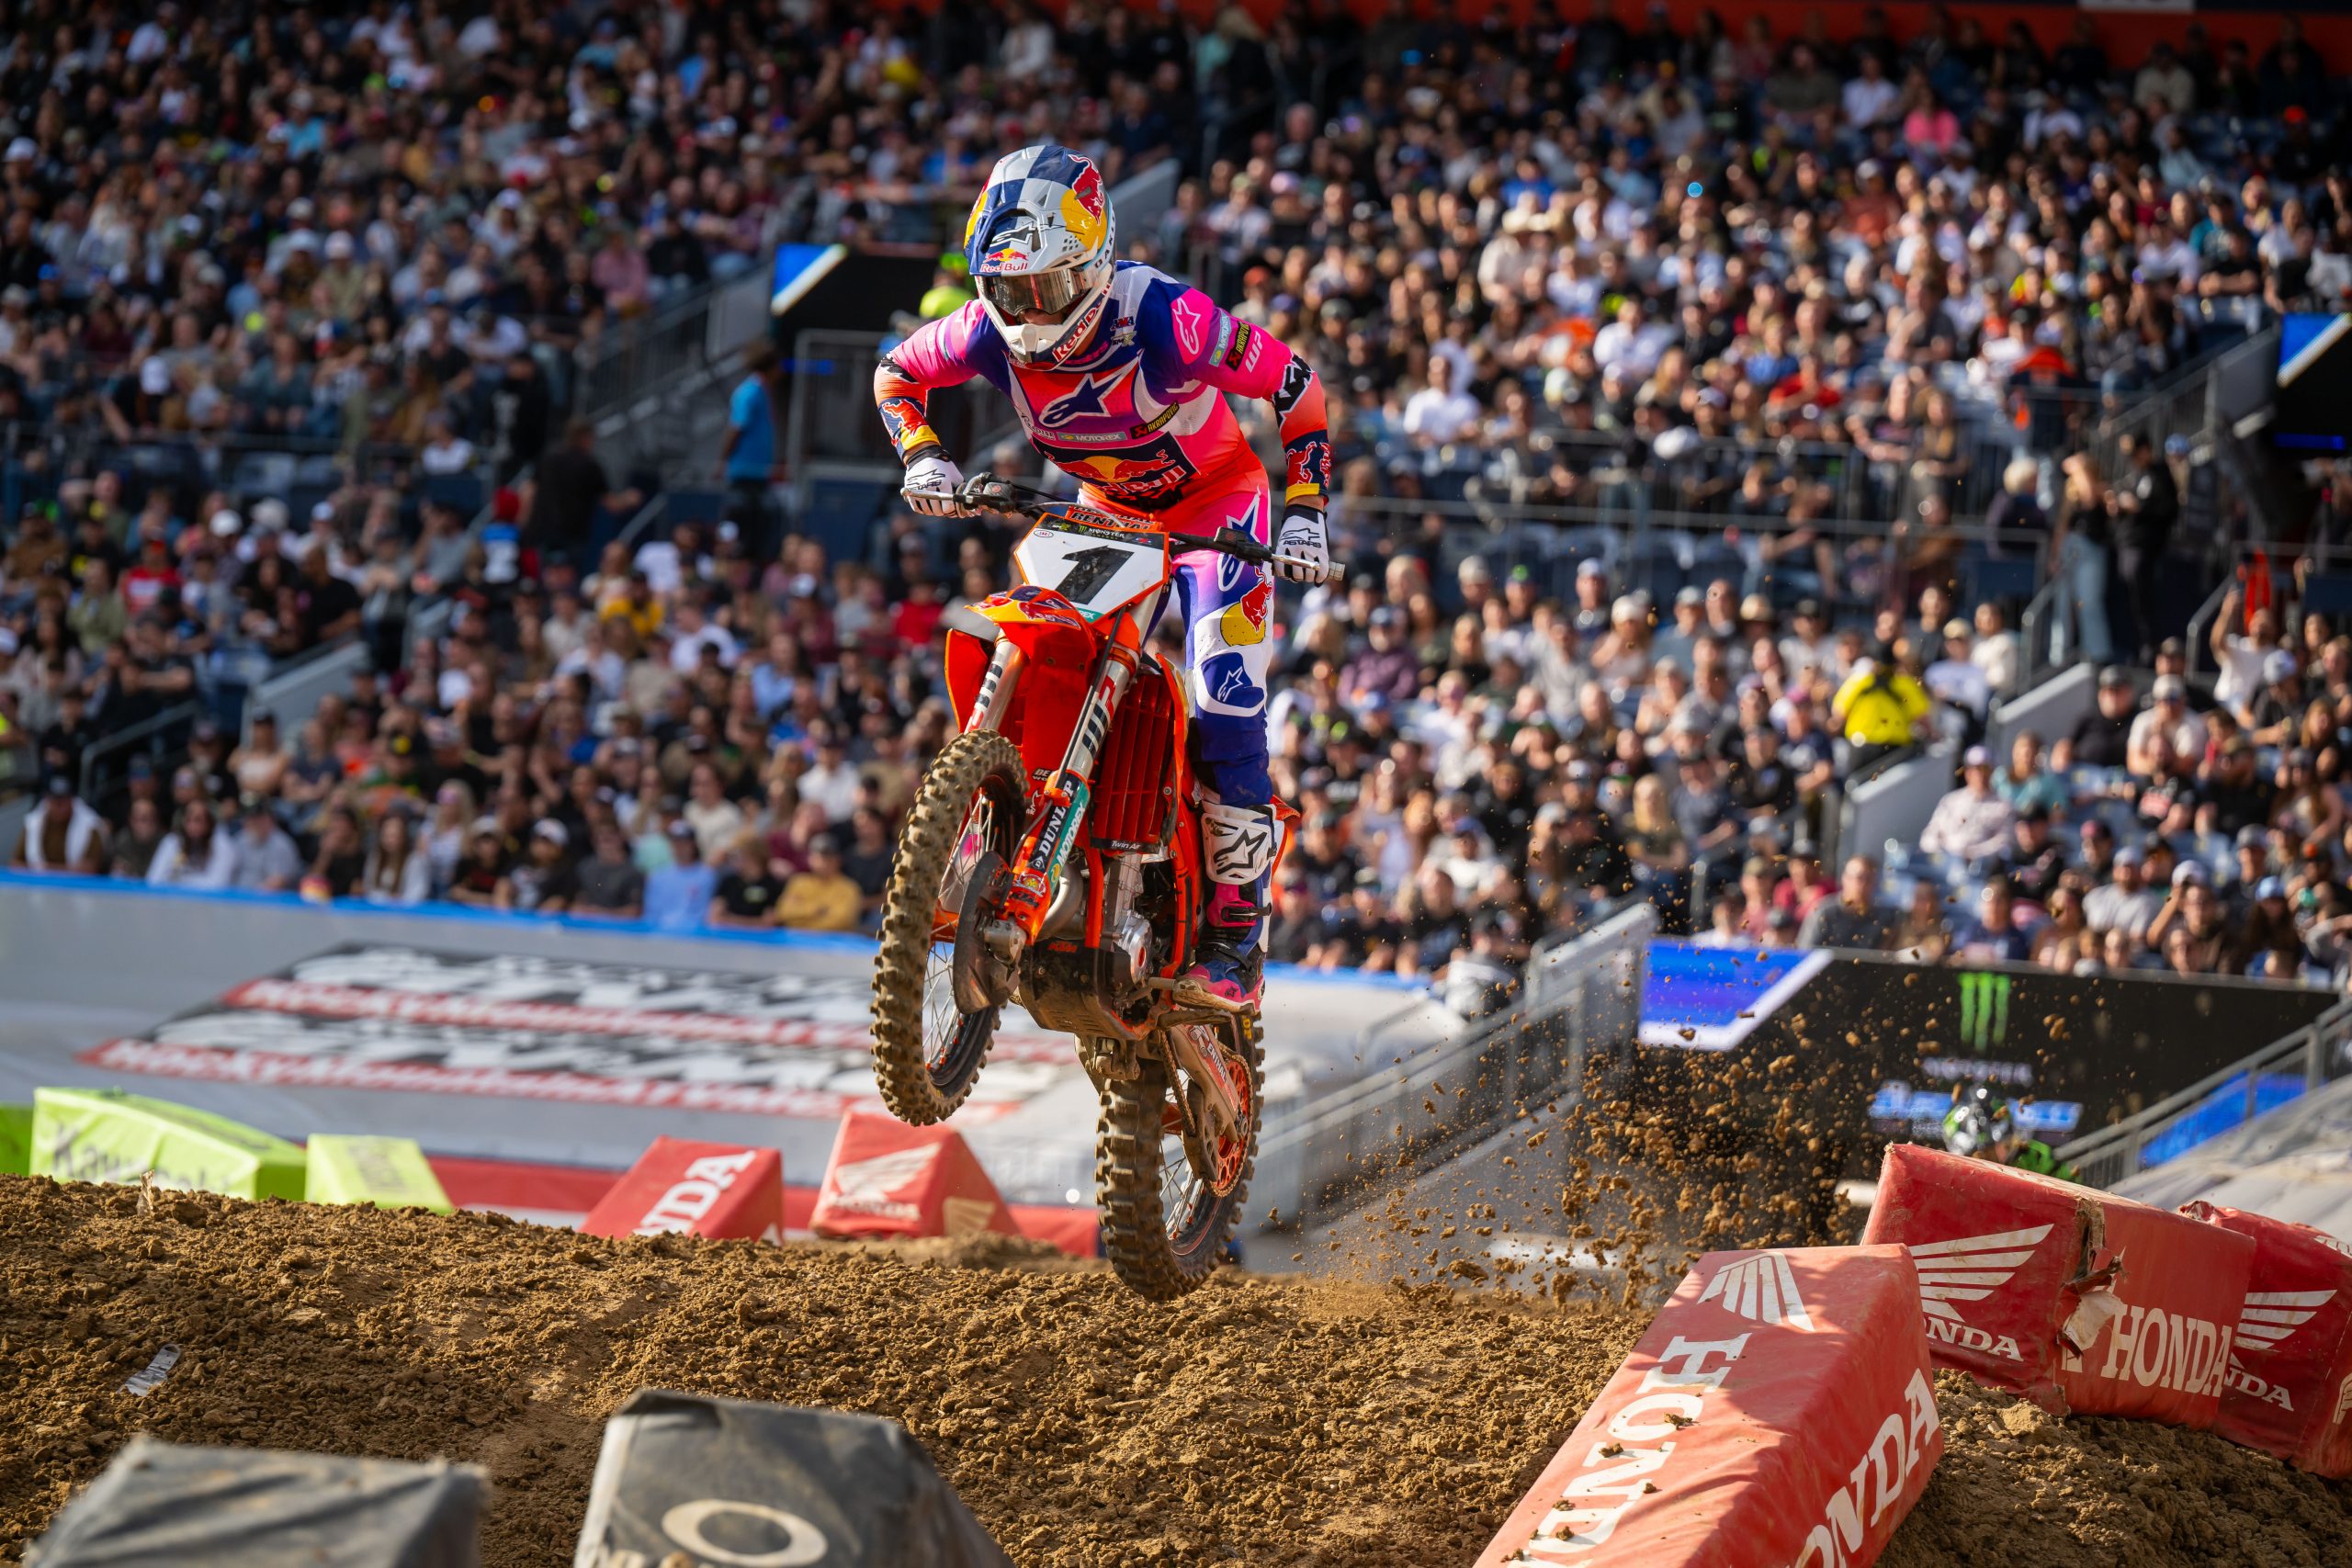 Chase Sexton fights hard for eighth in penultimate round of Supercross